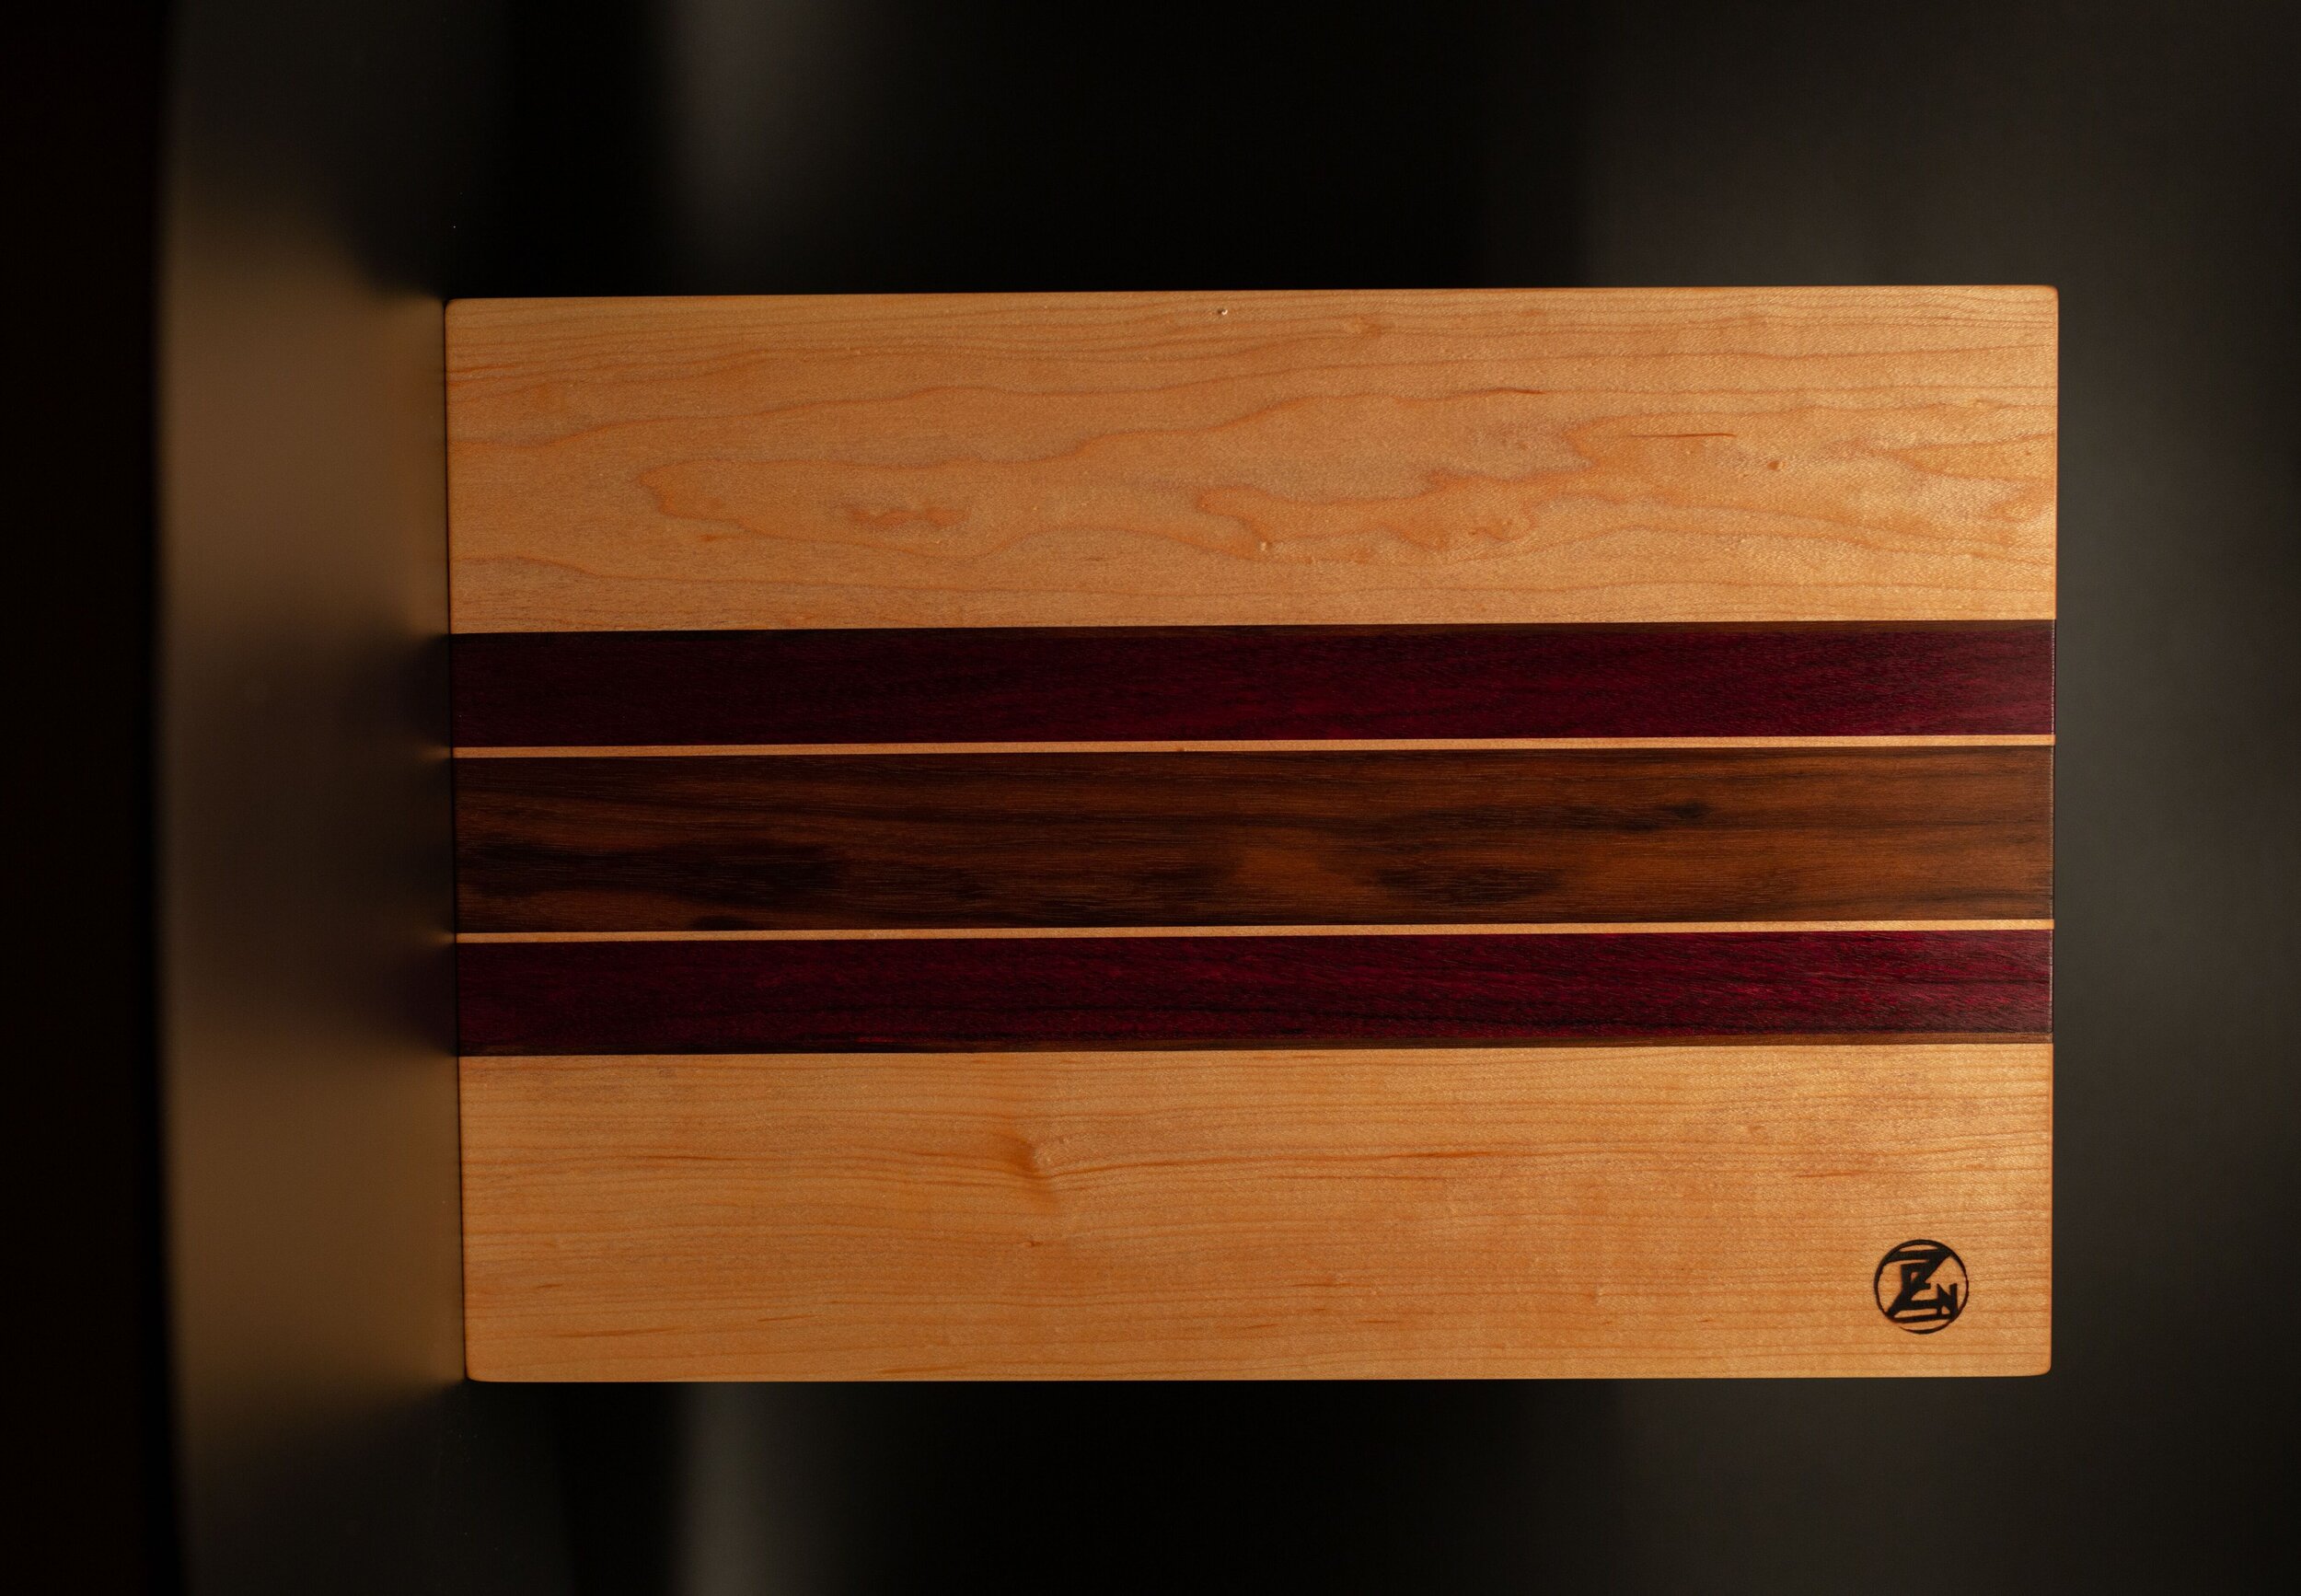 Cutting board - Alindrie Creations & Inspirations